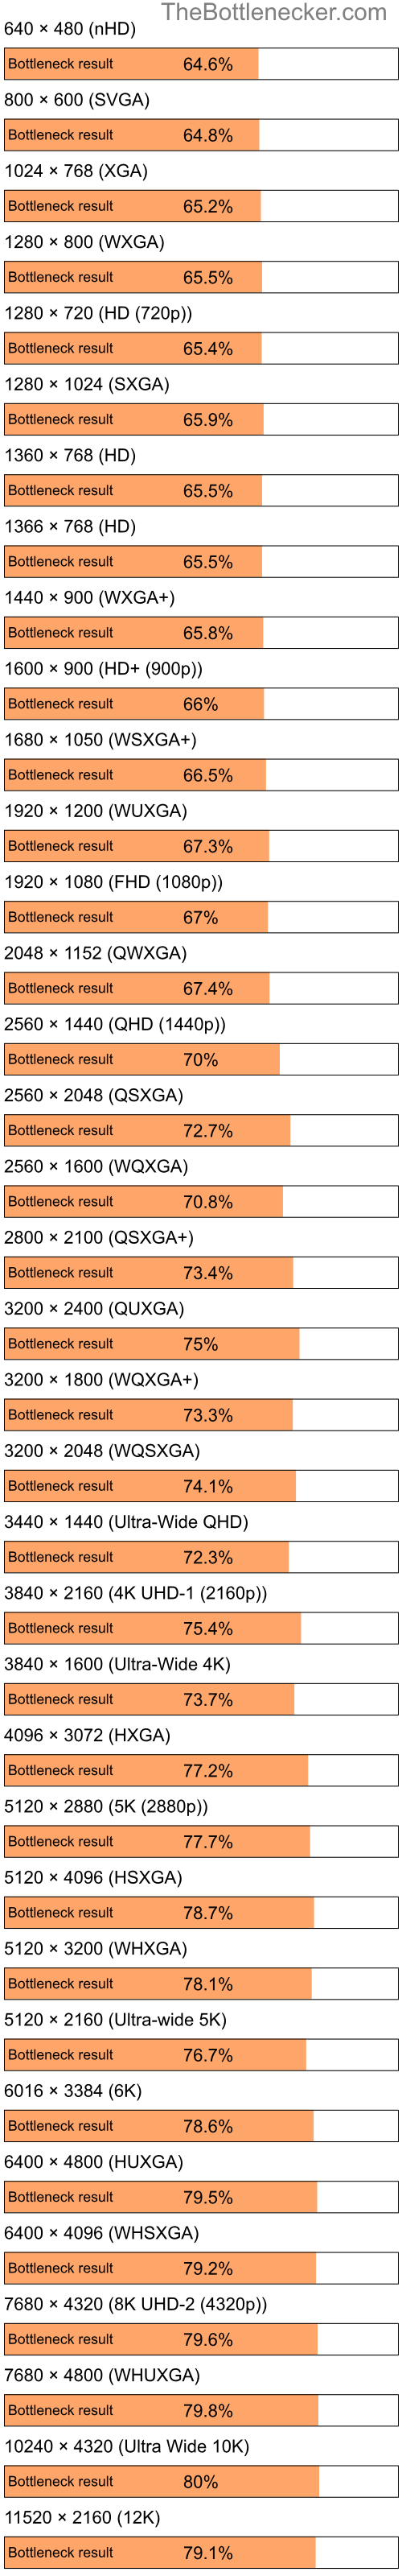 Bottleneck results by resolution for Intel Atom N280 and AMD Radeon HD 6290 in7 Days to Die